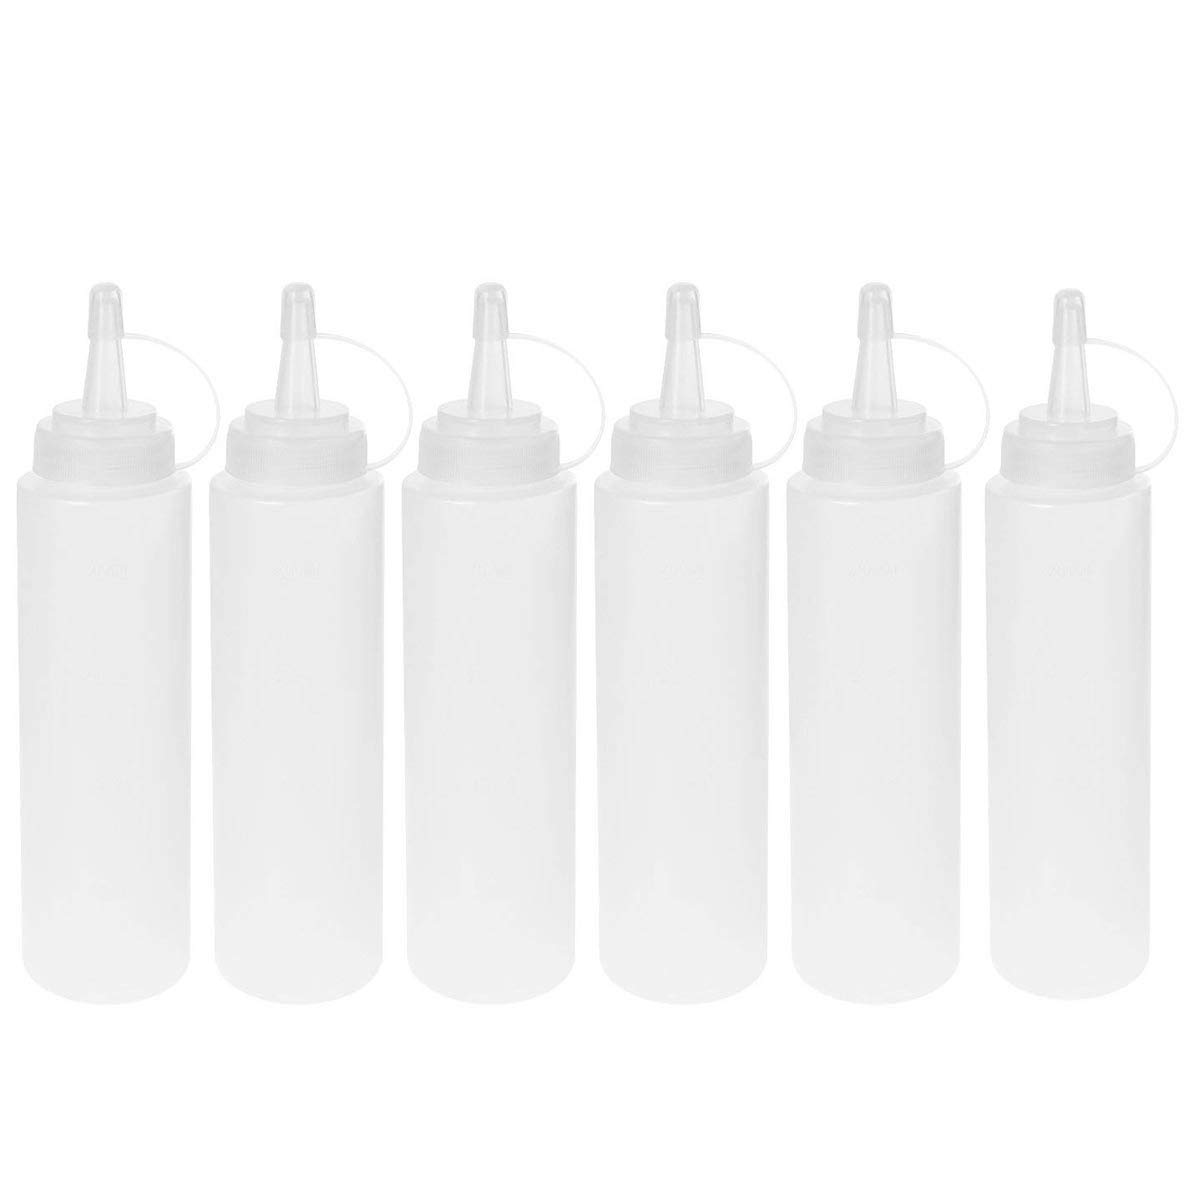 Hot Sauce and Olive Oil Plastic Squeeze Dispensers Mayonnaise Perfect for Kitchen Condiments Ketchup Bottle Mustard Squeeze Bottles with Caps BPA Free 6 pcs 8 oz Squeezy Sauce Bottles 